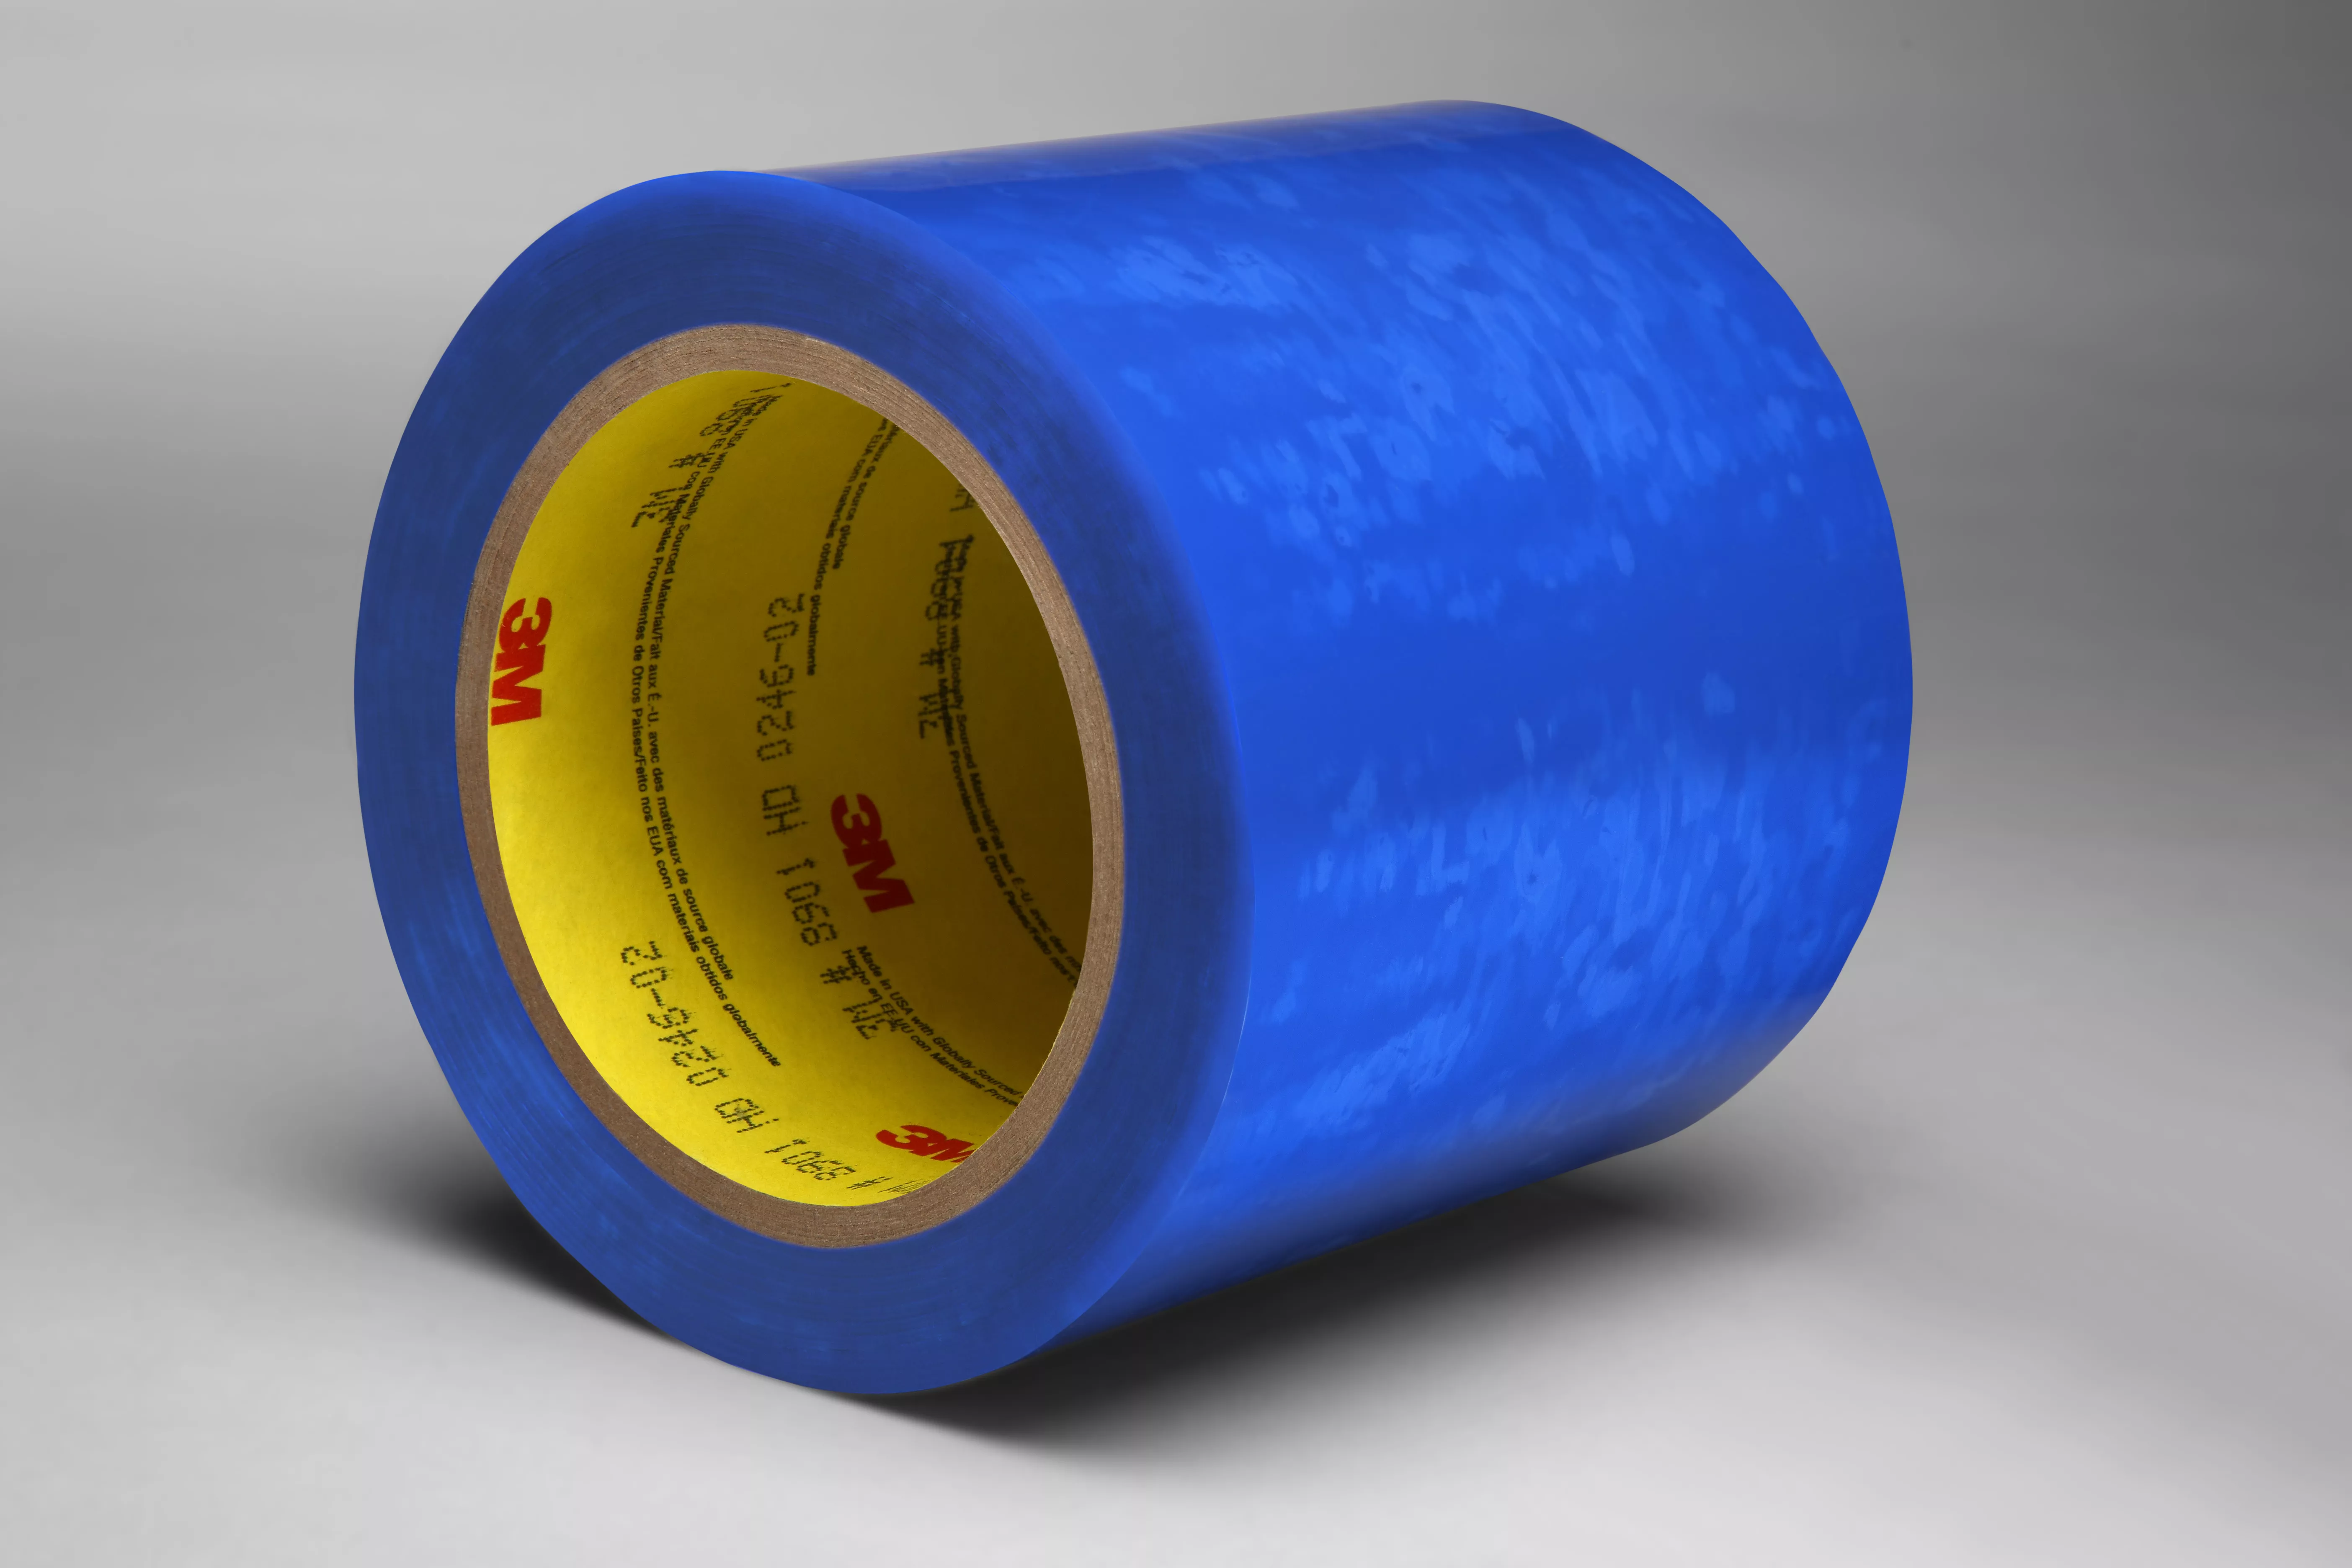 3M™ Polyester Tape 8901, Blue, 2 in x 72 yd, 0.9 mil, 24 rolls per case,
Plastic Core